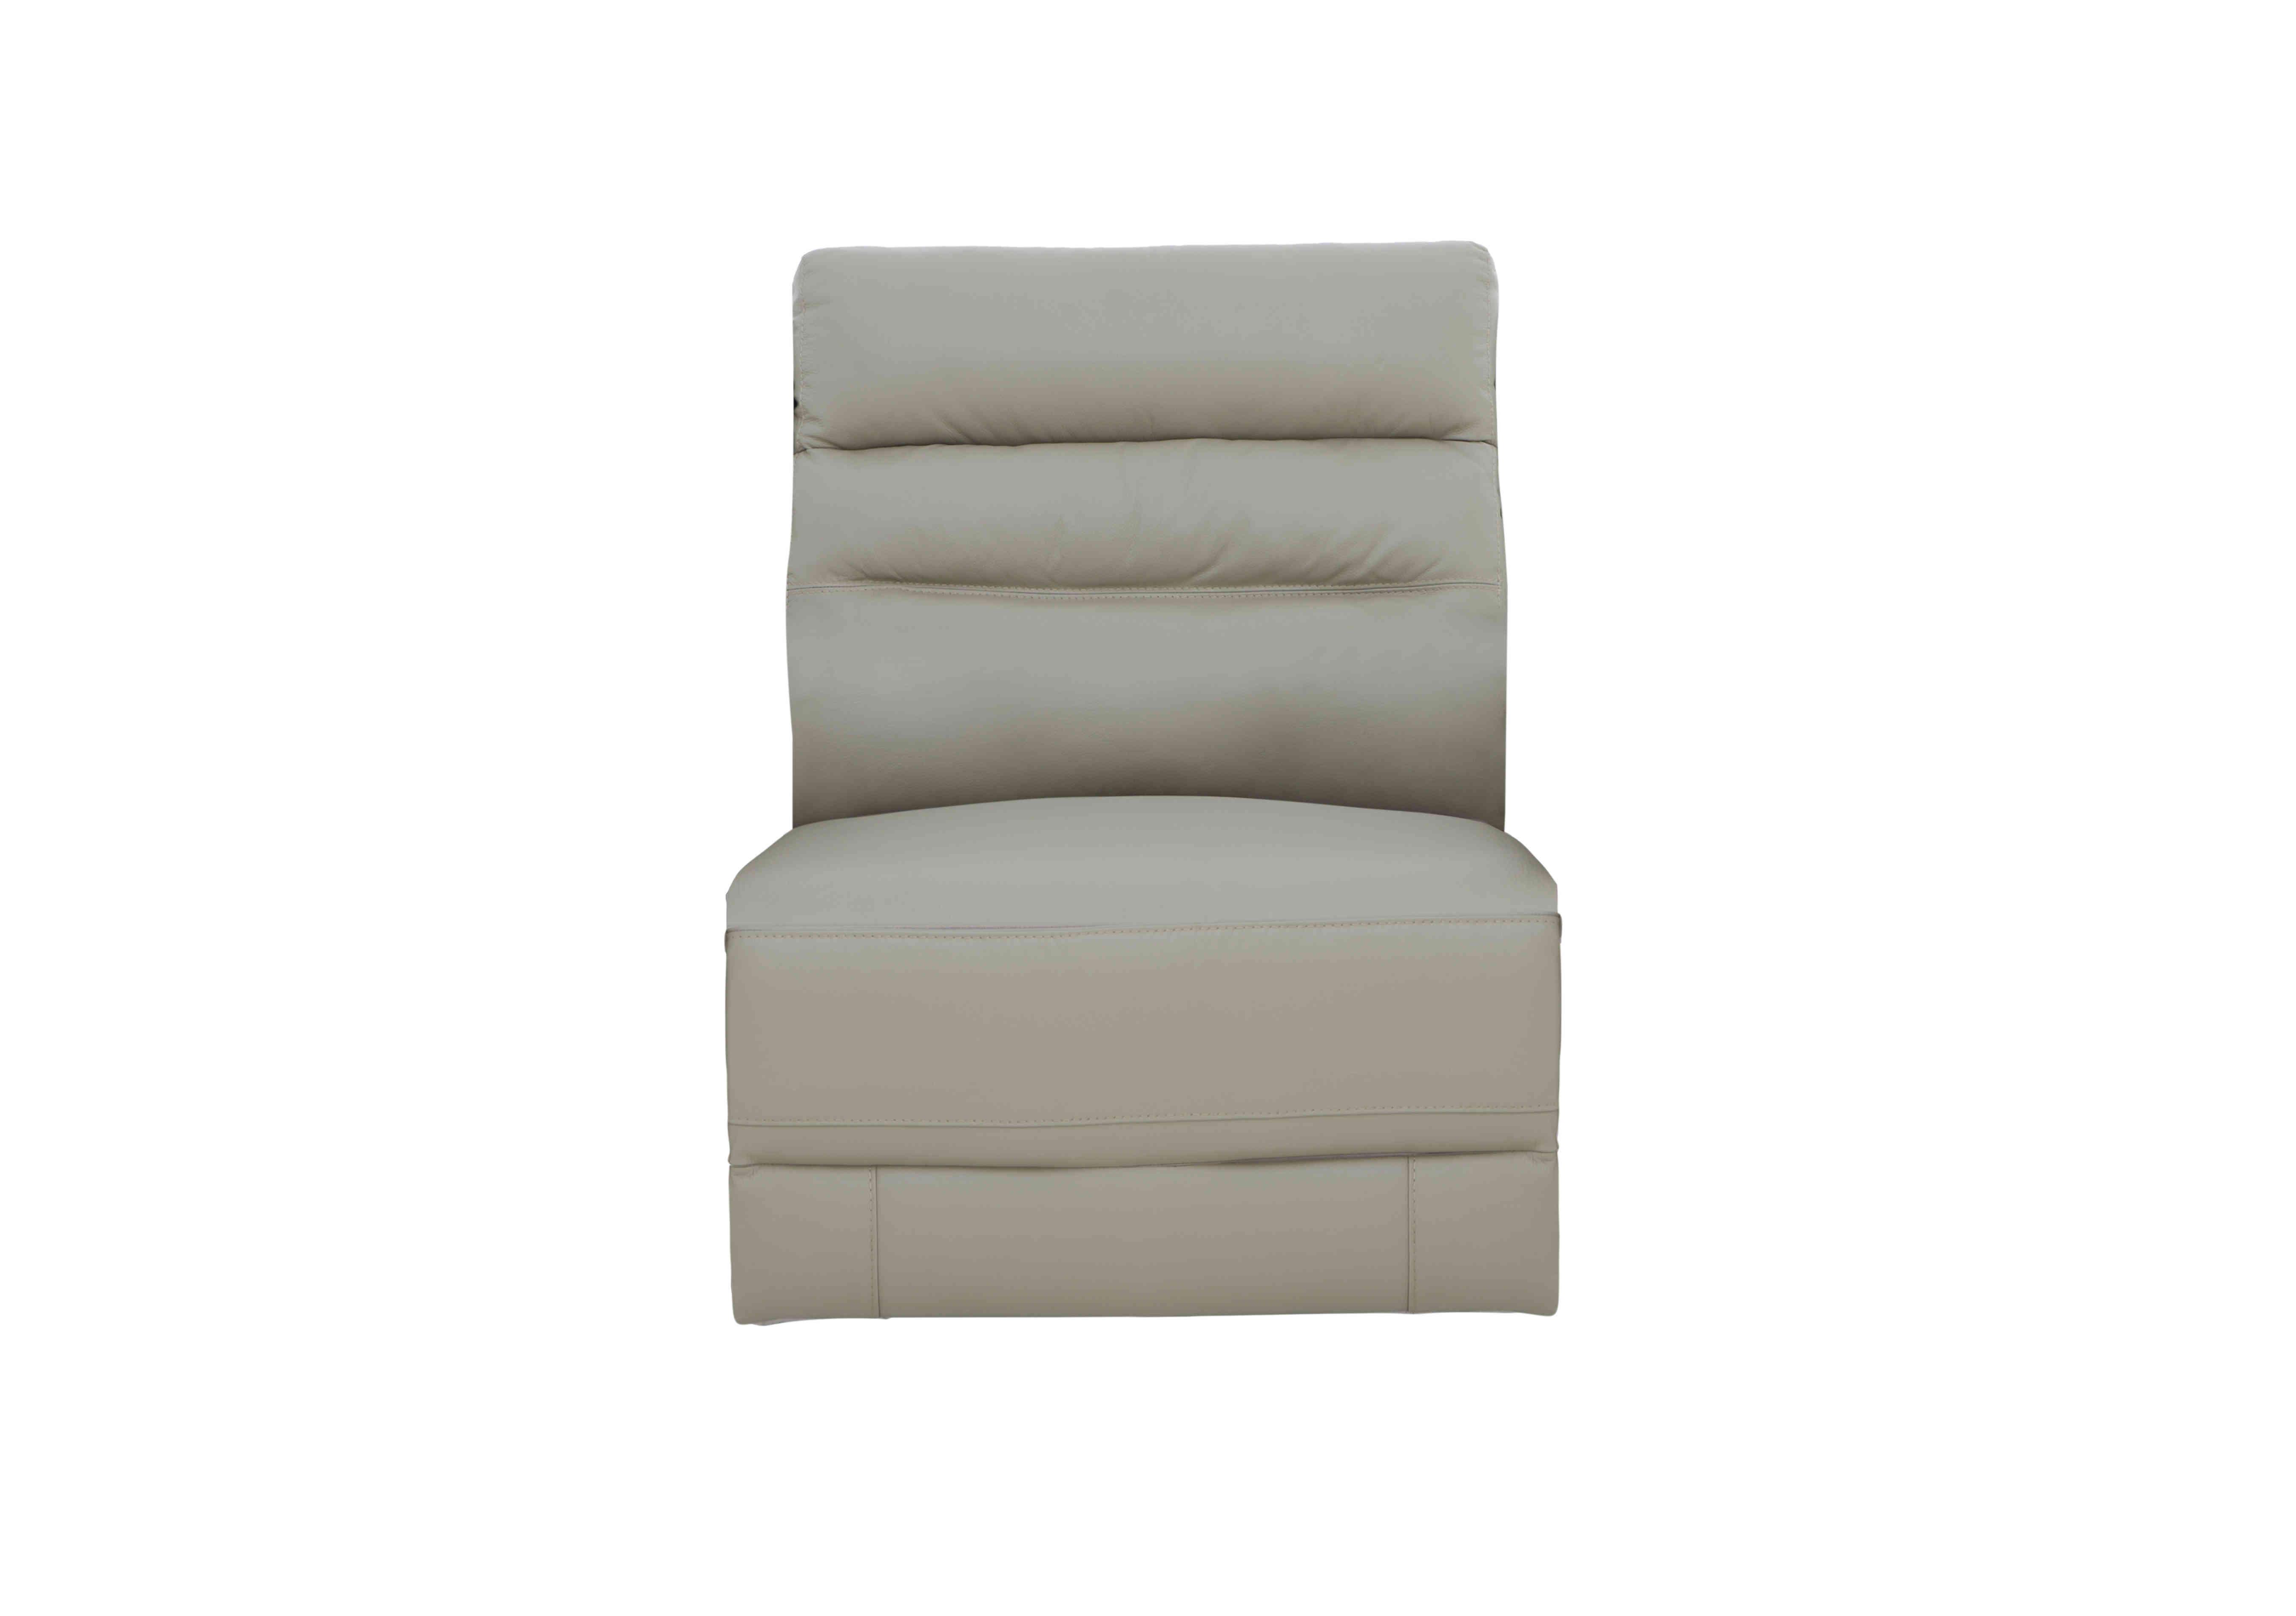 Berlin Leather Armless Unit in Sand Le-9303 on Furniture Village